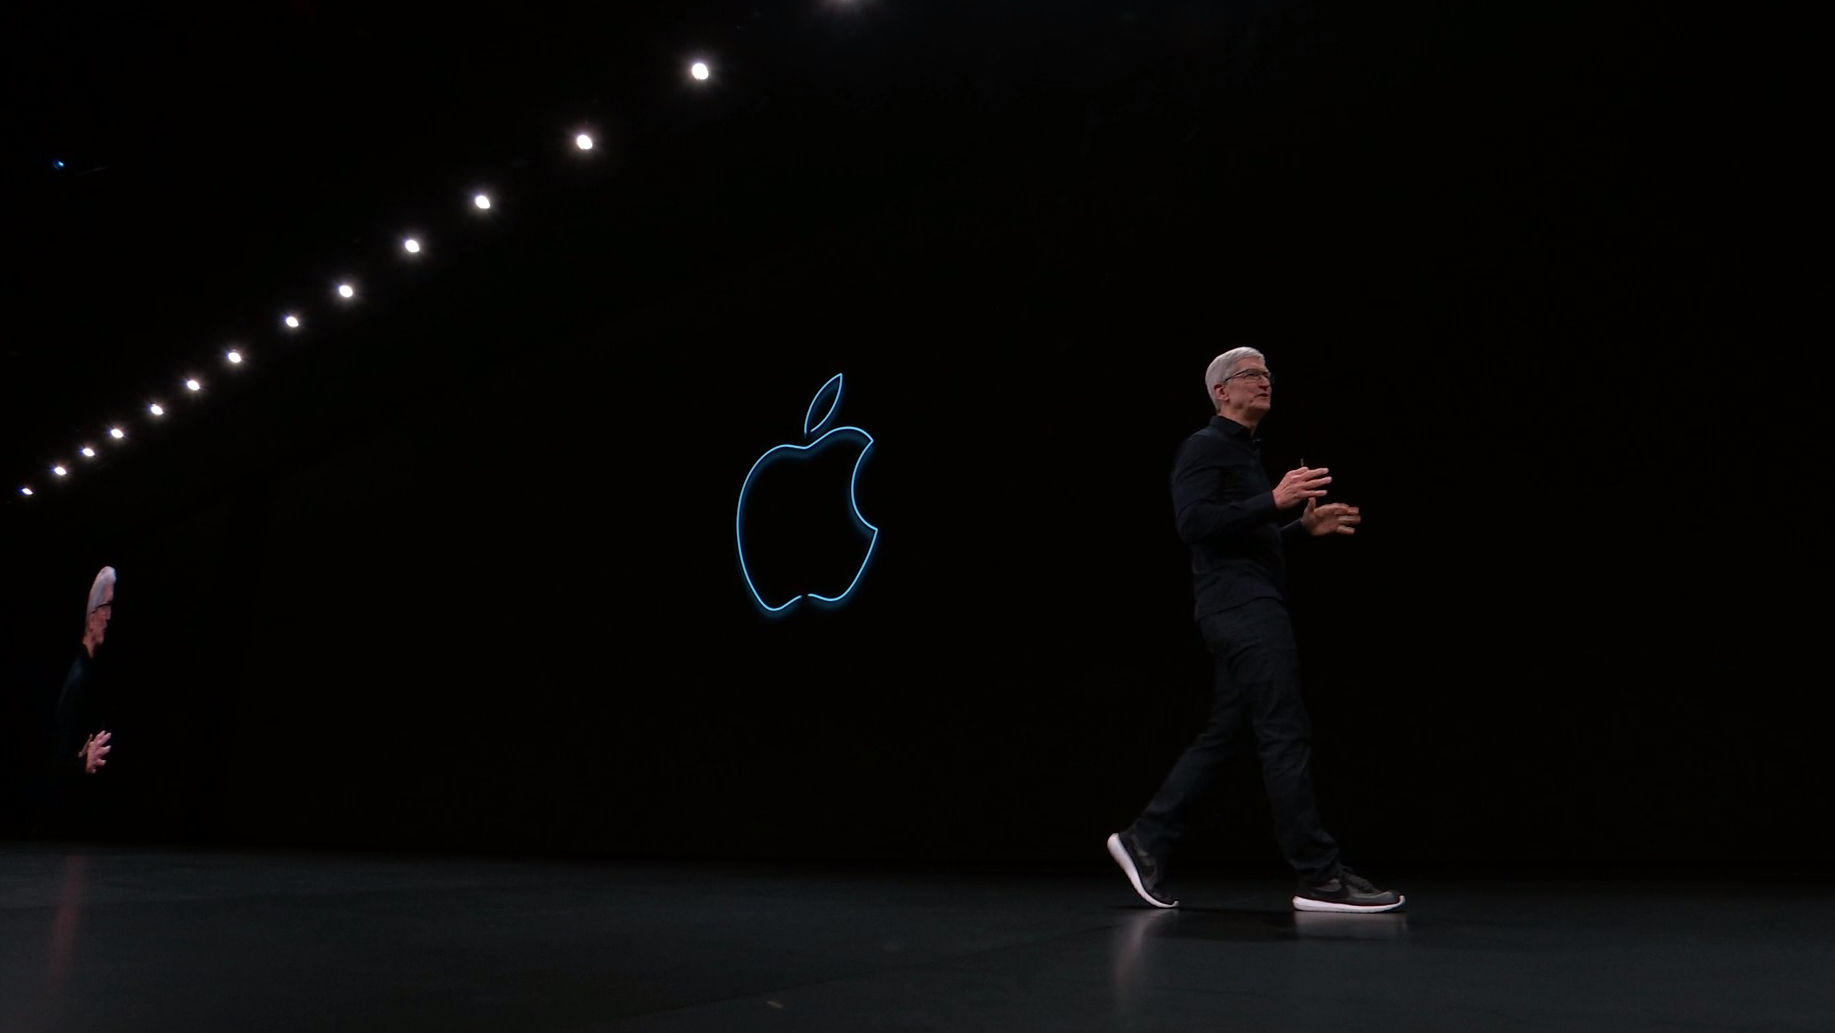 Tech Talk: Apple is bringing augmented reality into the forefront of technology